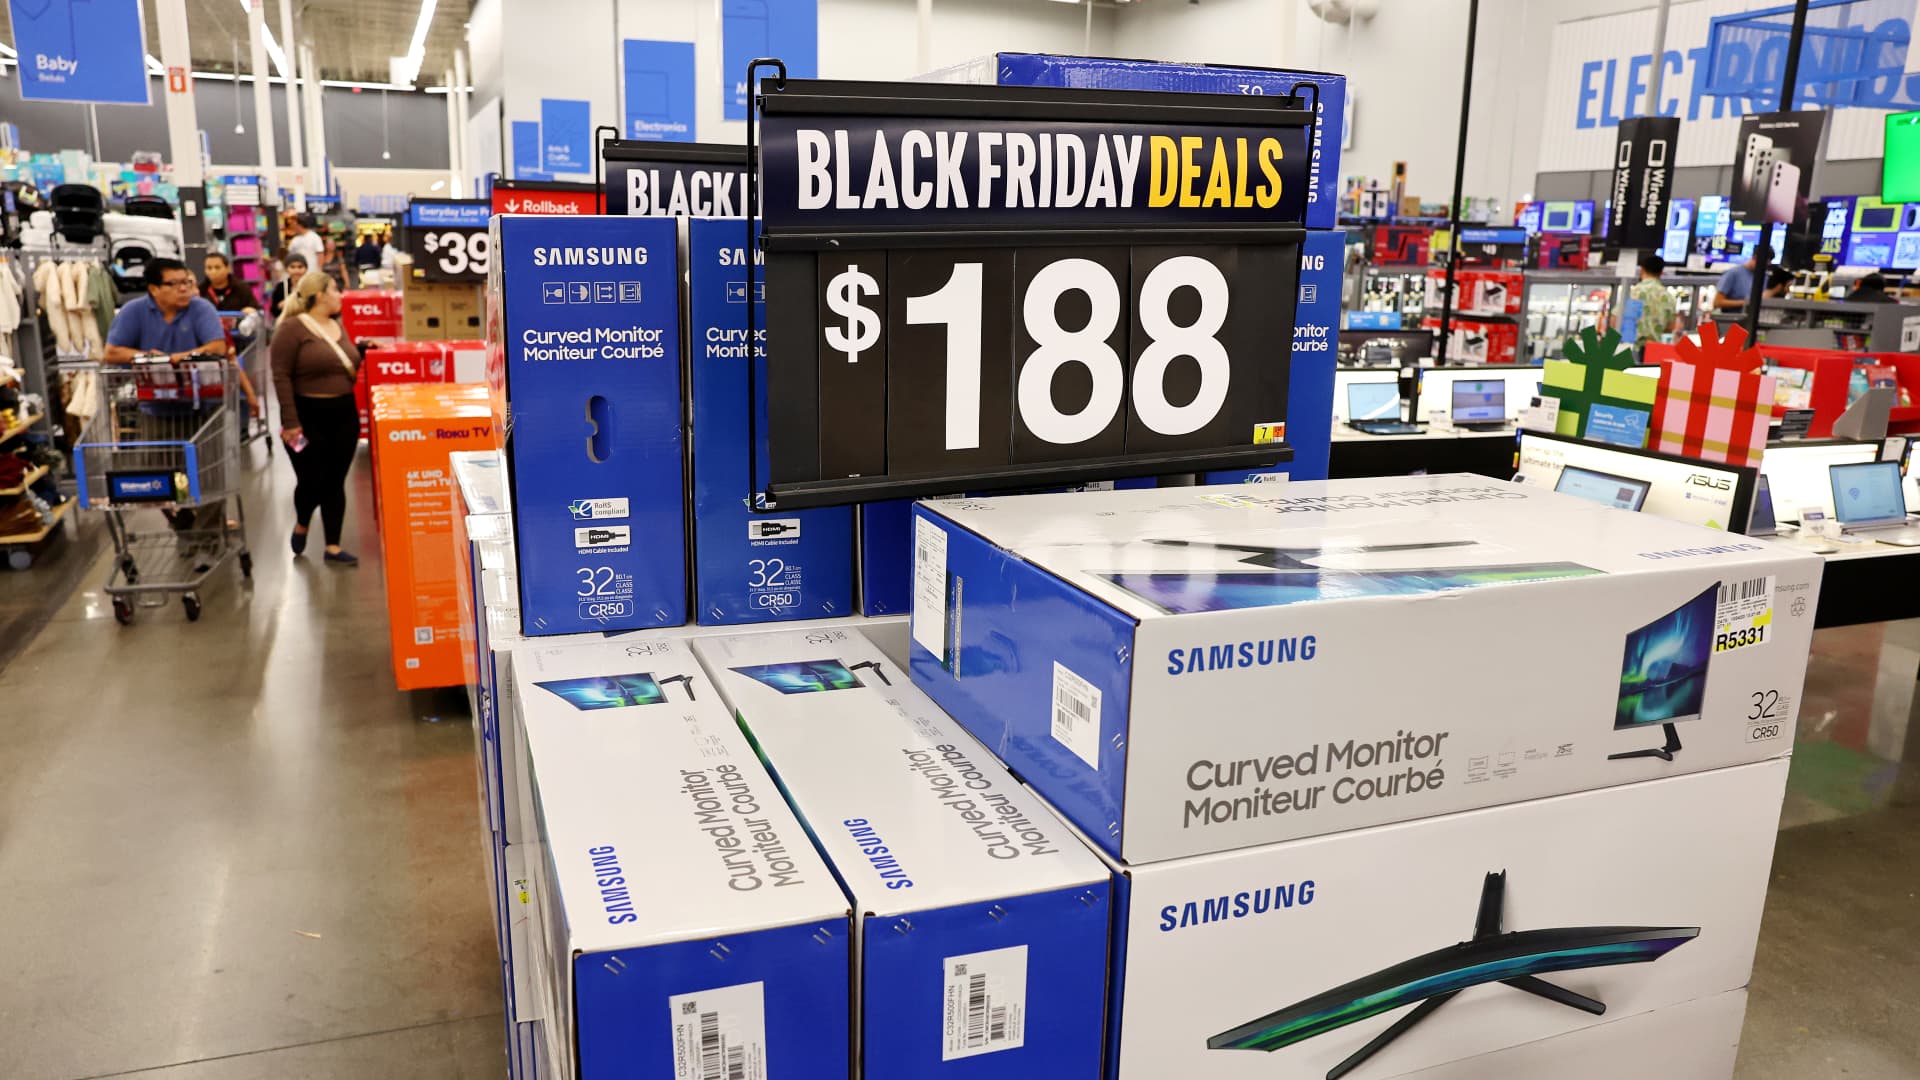 Bad news for Black Friday: Retailers cast doubt on holiday shopping with cautious guidance